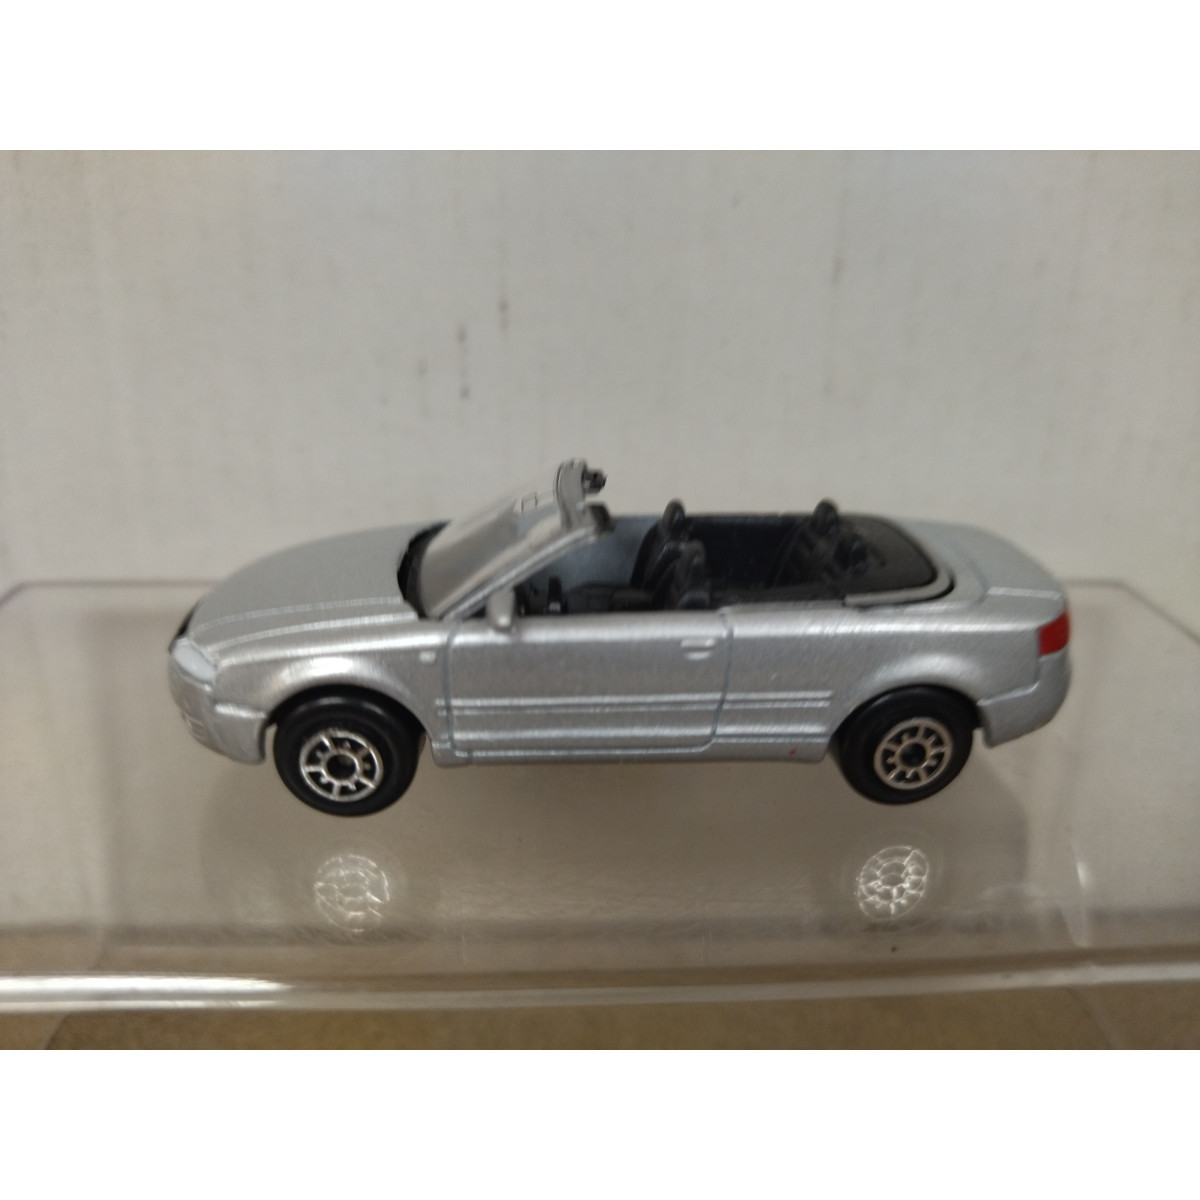 WELLY Flawed Audi A4 Cabriolet Convertible Alloy Car Collection Model  Silver 1:18 Hobby Metal Toy Holiday Gift Ornament Souvenir - AliExpress